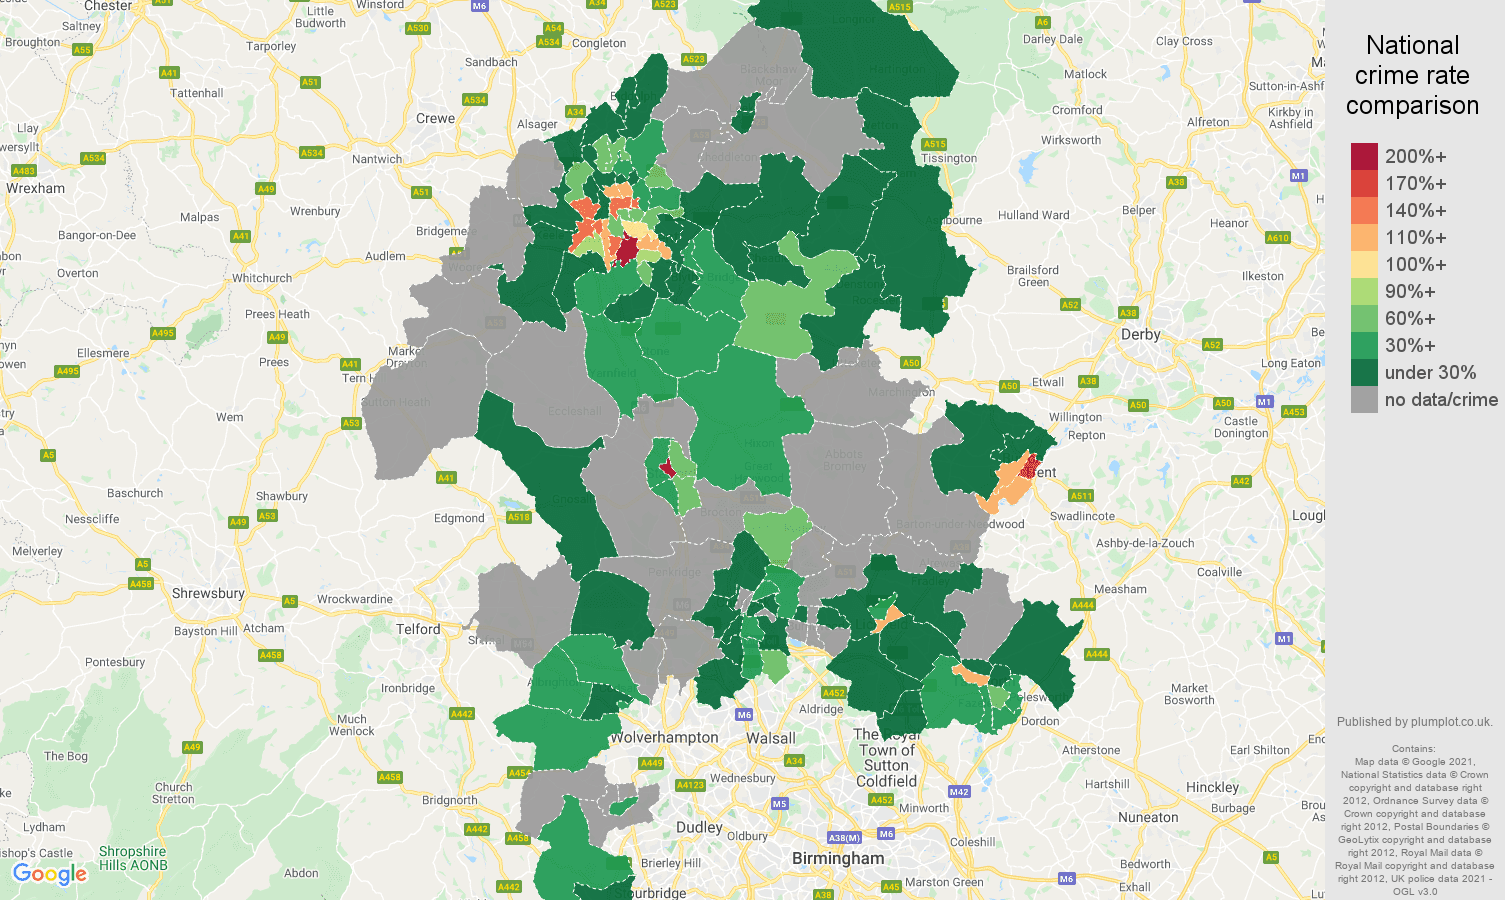 Staffordshire bicycle theft crime rate comparison map